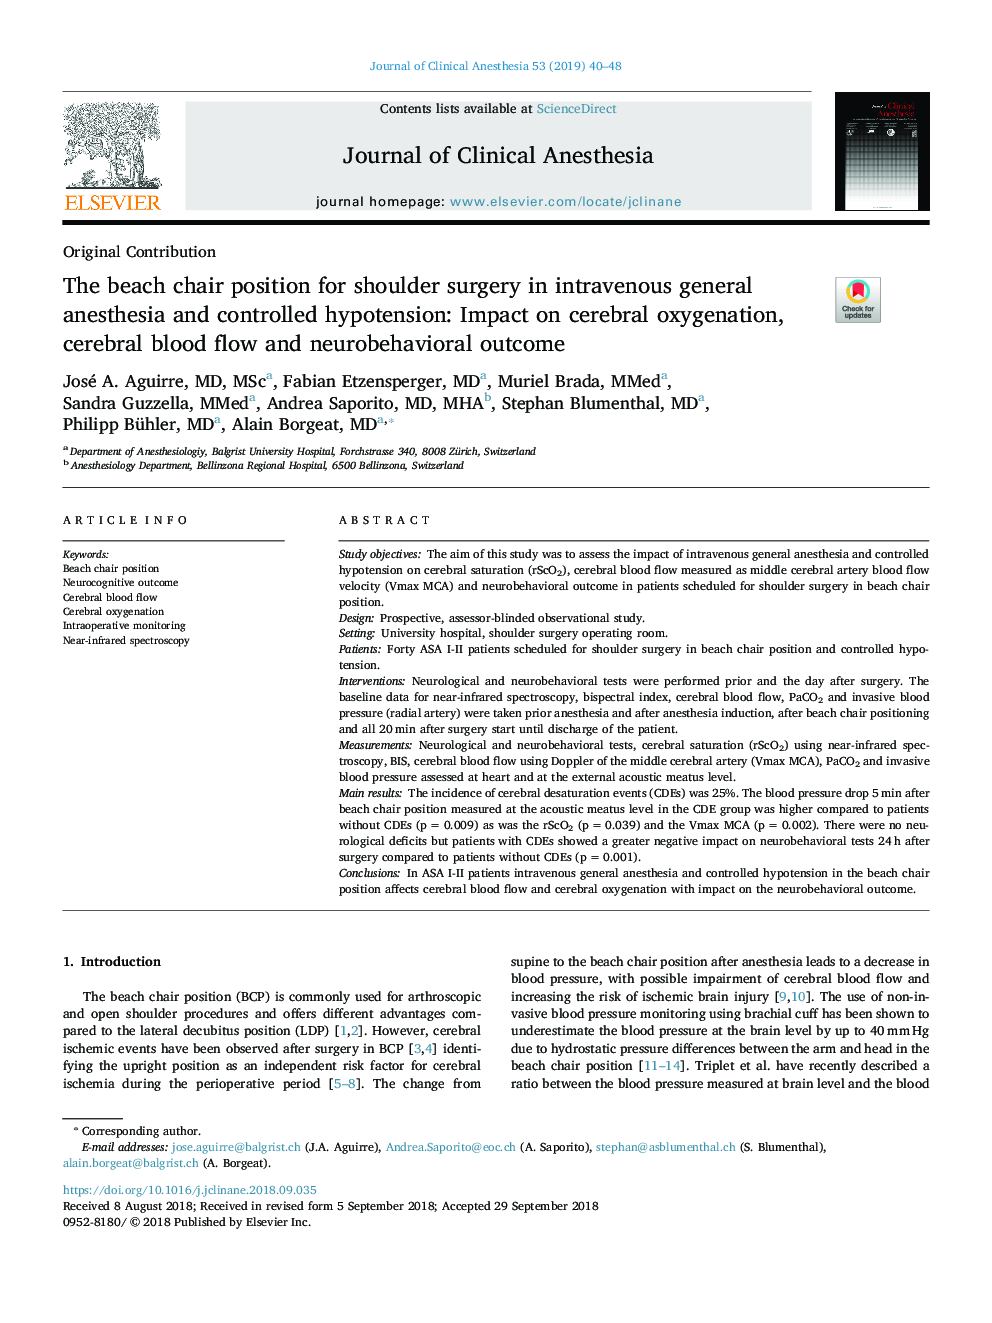 The beach chair position for shoulder surgery in intravenous general anesthesia and controlled hypotension: Impact on cerebral oxygenation, cerebral blood flow and neurobehavioral outcome